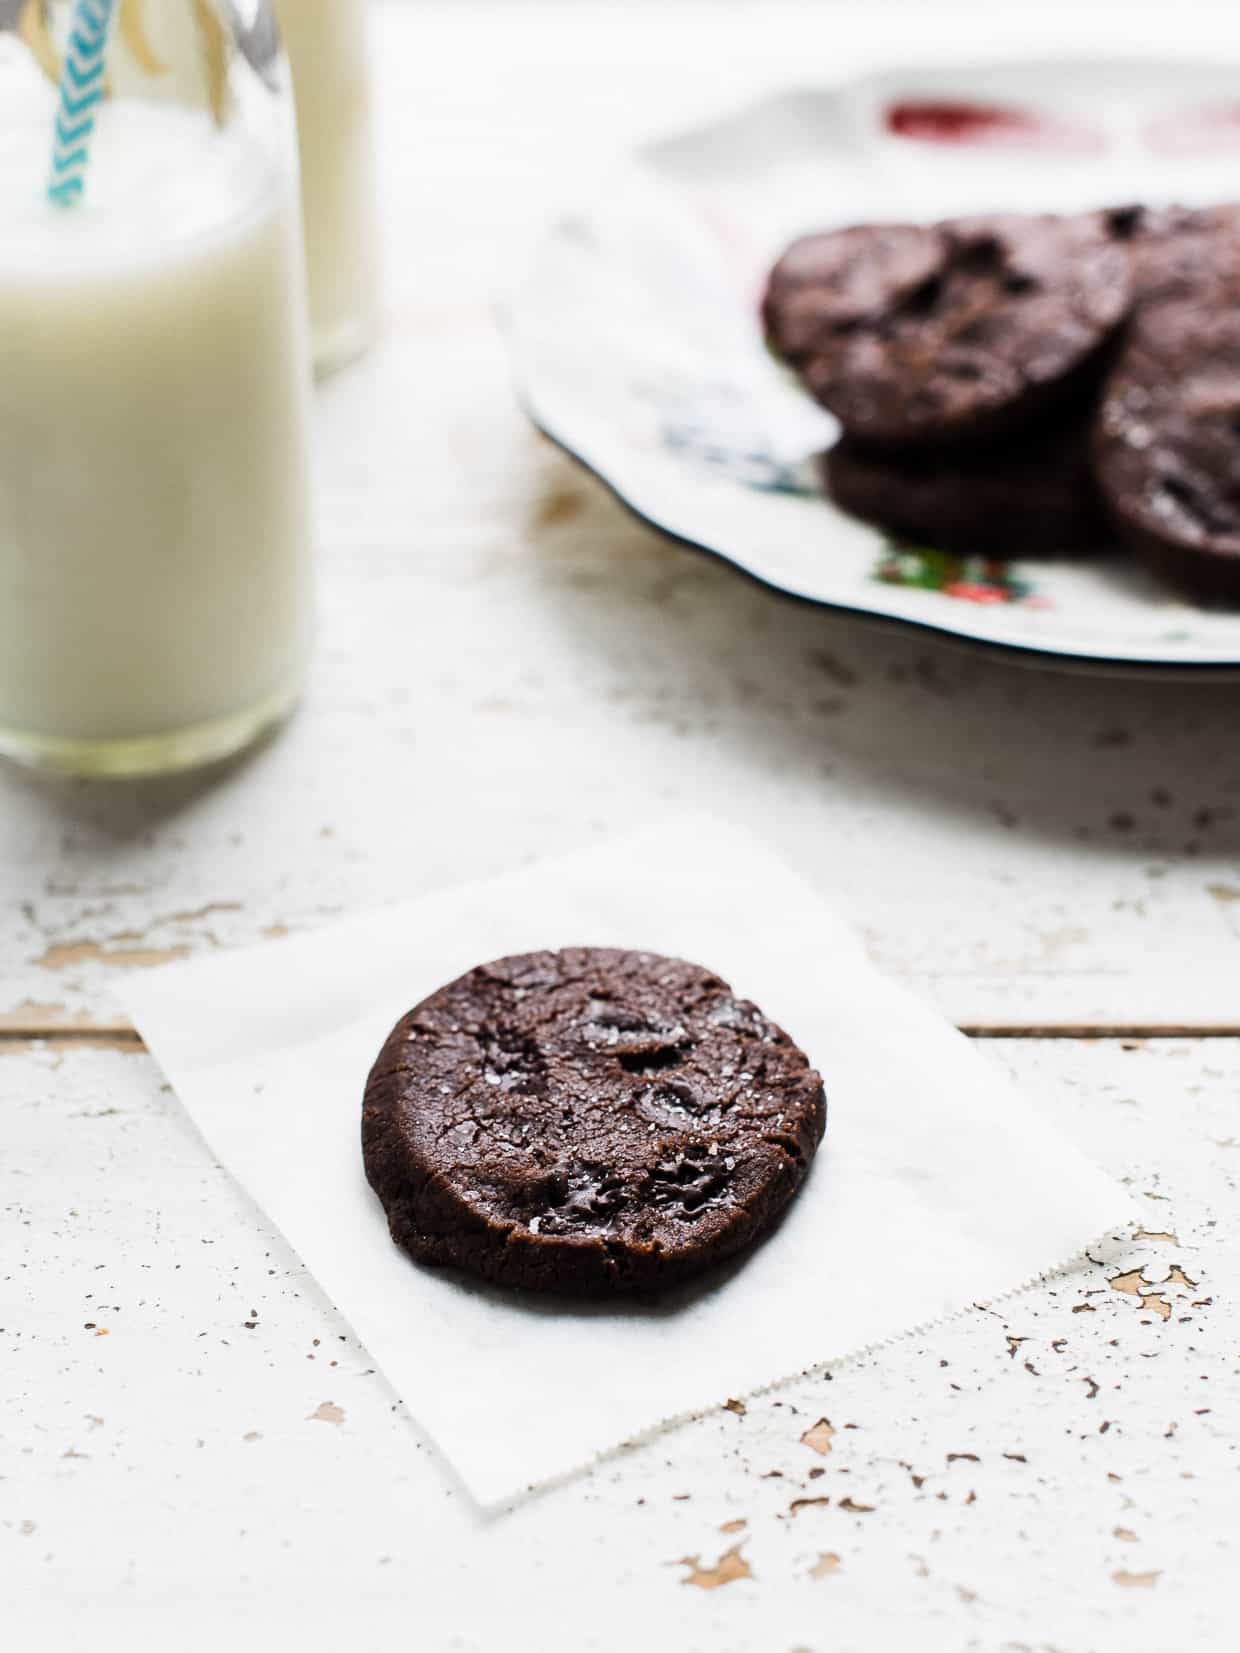 Chocolate cookie served with milk on a rustic surface.